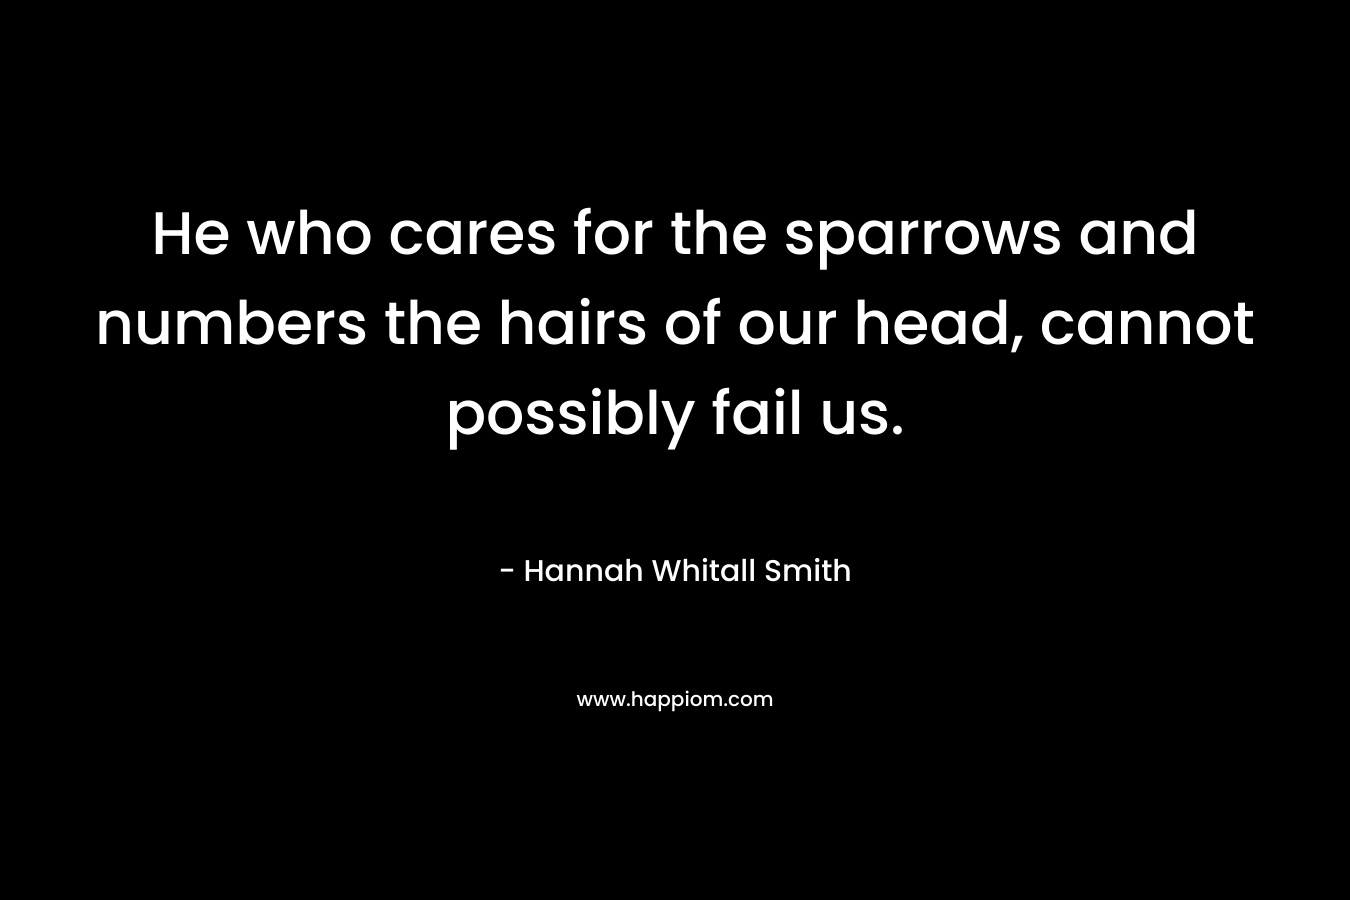 He who cares for the sparrows and numbers the hairs of our head, cannot possibly fail us. – Hannah Whitall Smith